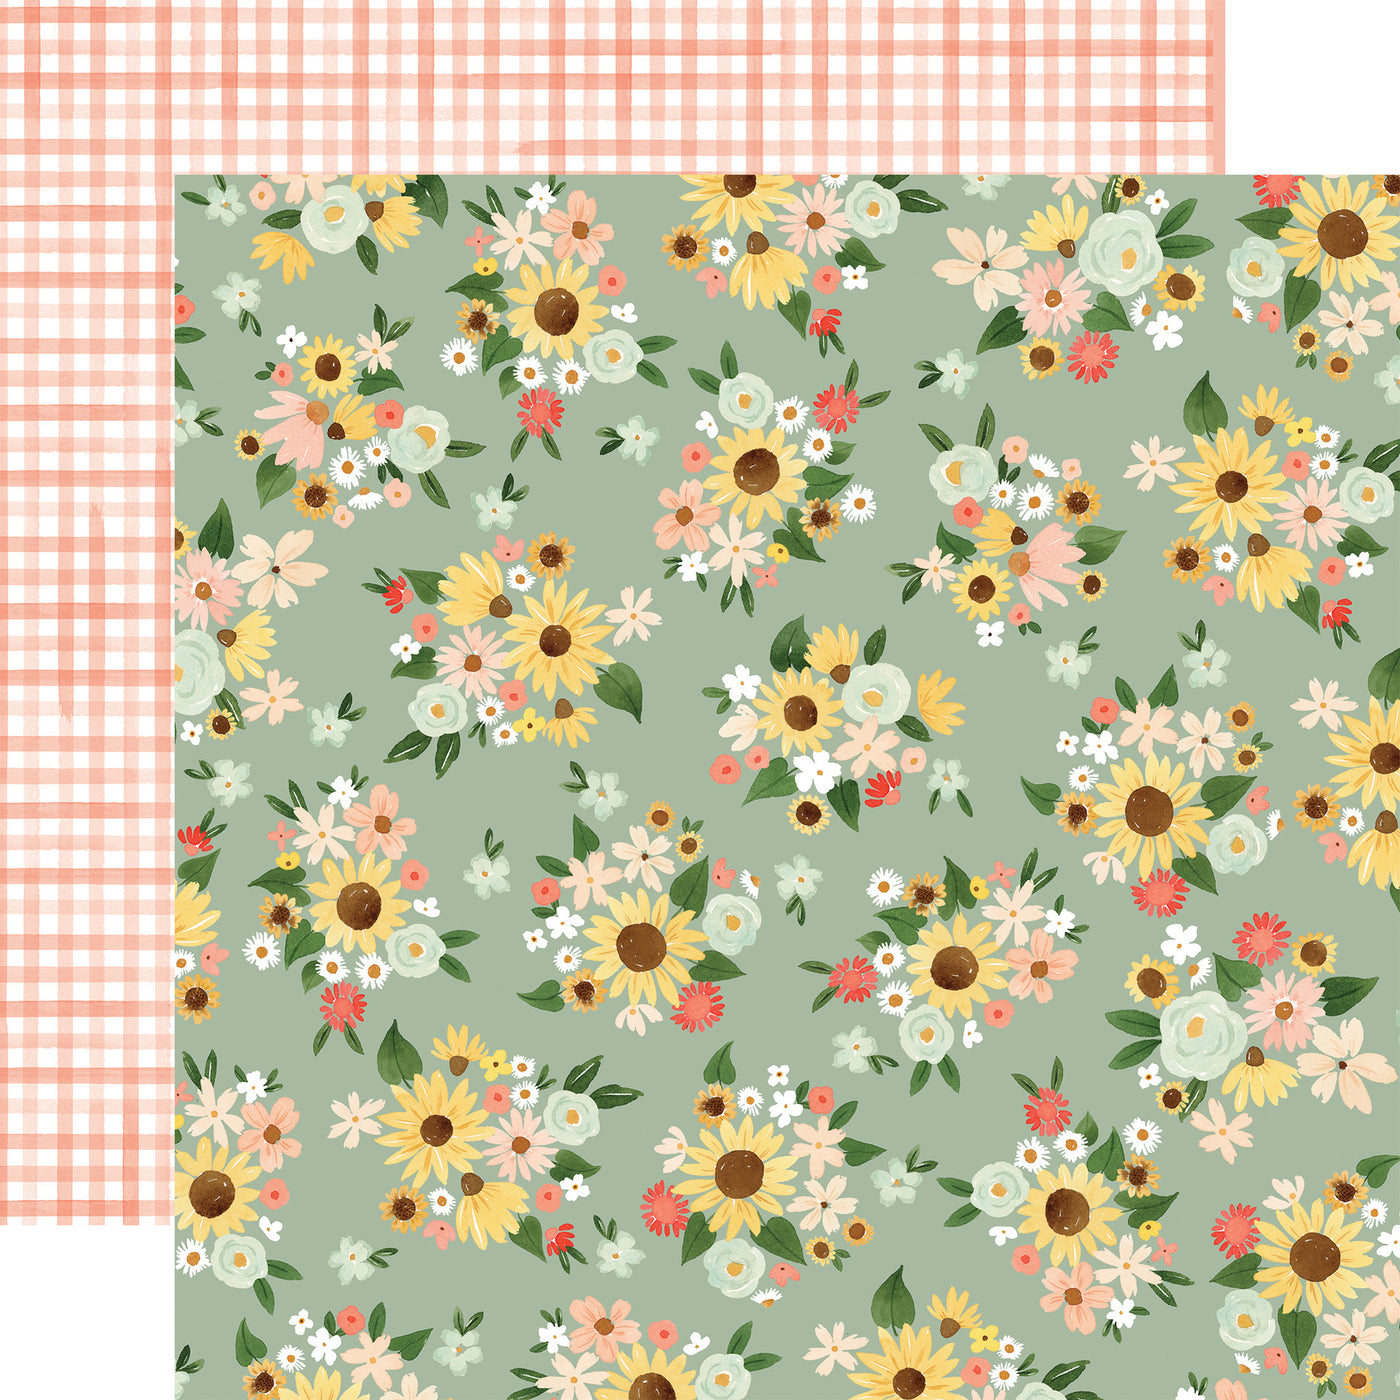 Double-sided 12x12: Sweet bunches of flowers on a mint background. The reverse is a coral weave pattern on a white background. 80 lb cover. Felt texture.